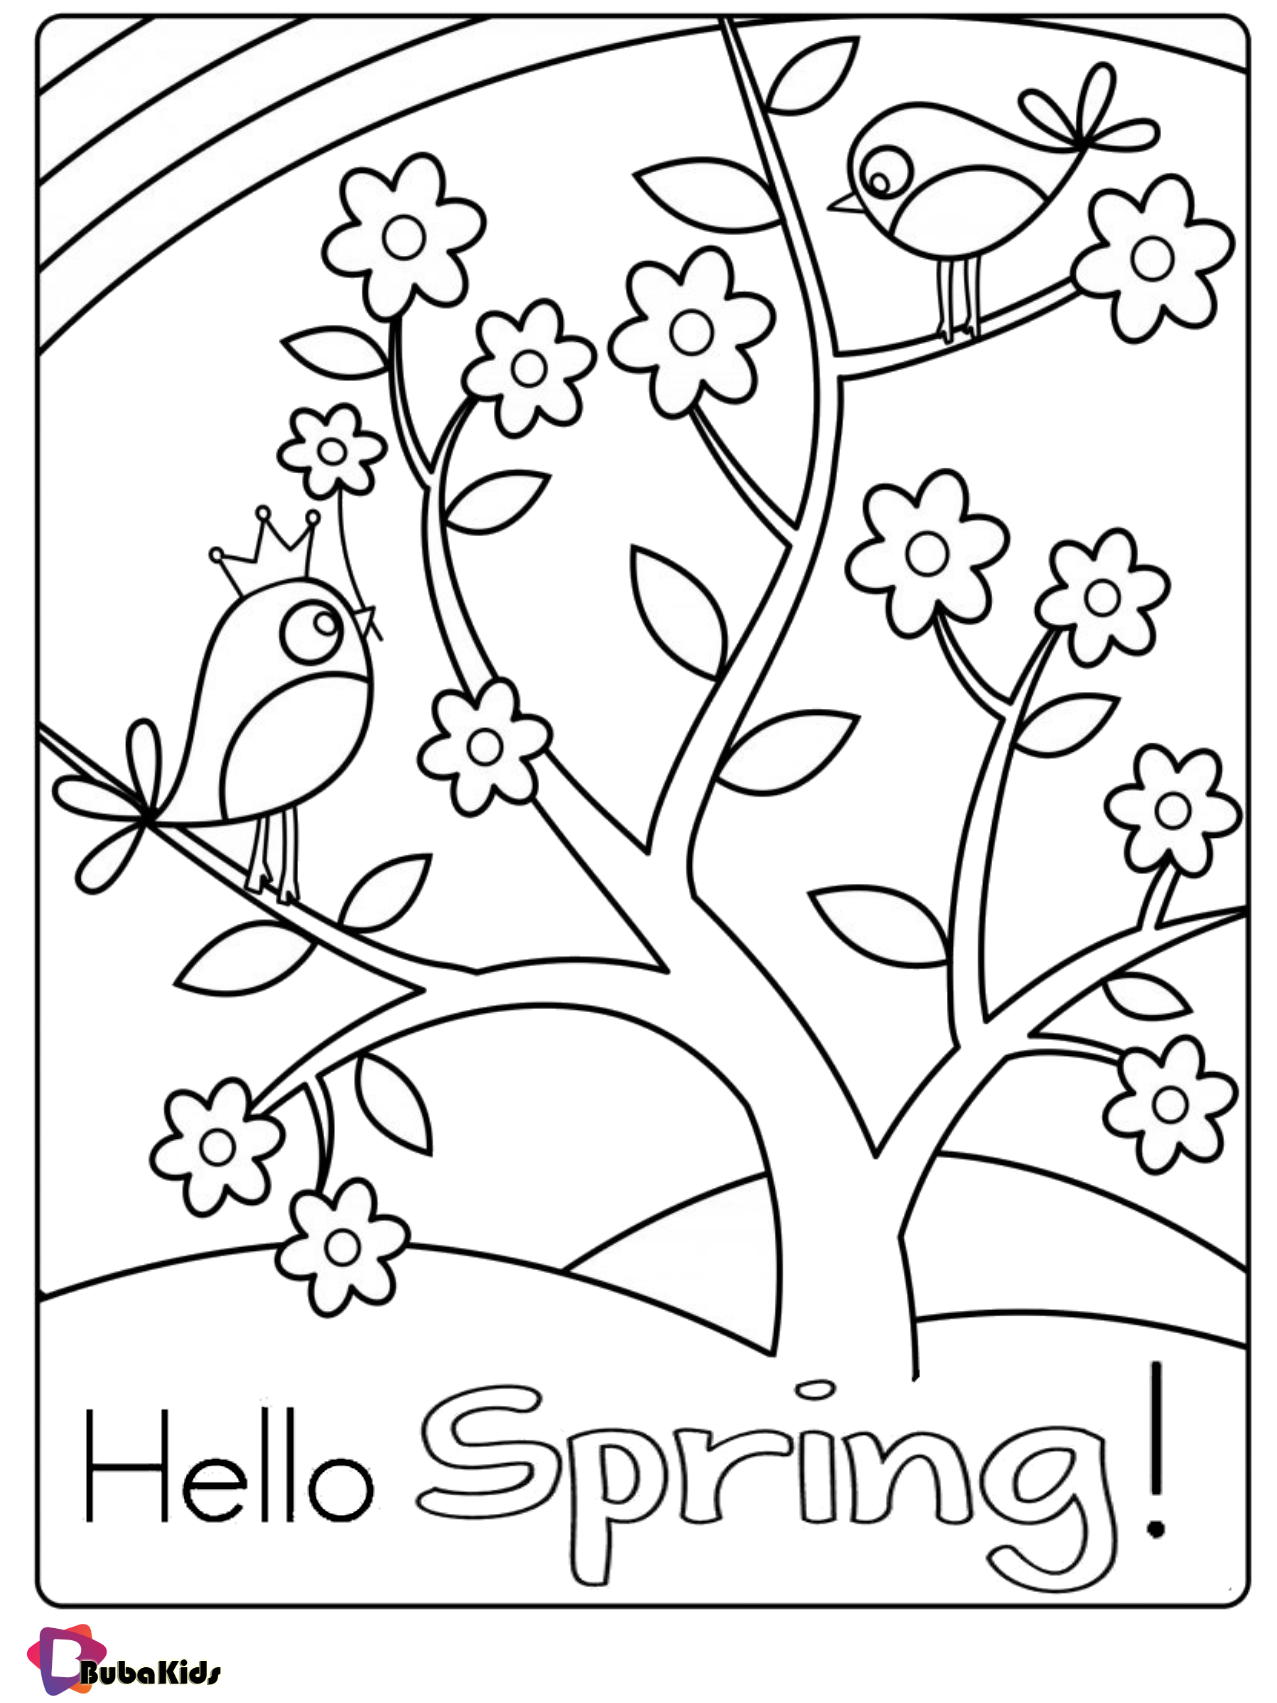 Free download Hello Spring! Coloring page for kids